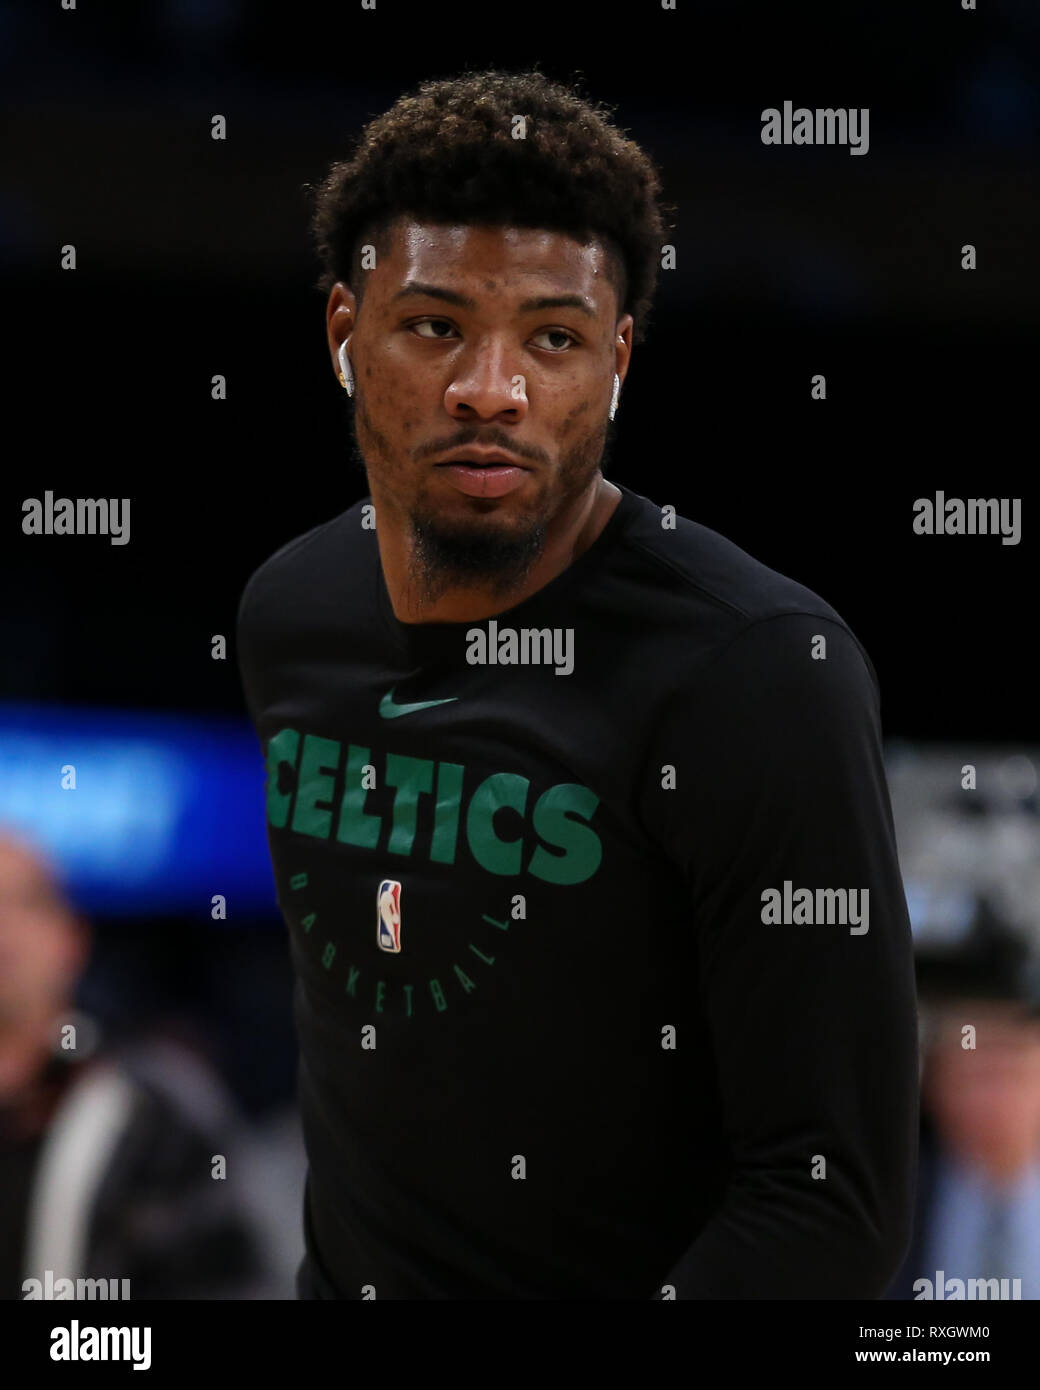 Boston Celtics guard Marcus Smart #36 during the Boston Celtics vs Los Angeles Lakers game at Staples Center in Los Angeles, CA on March 09, 2019. (Photo by Jevone Moore) Stock Photo